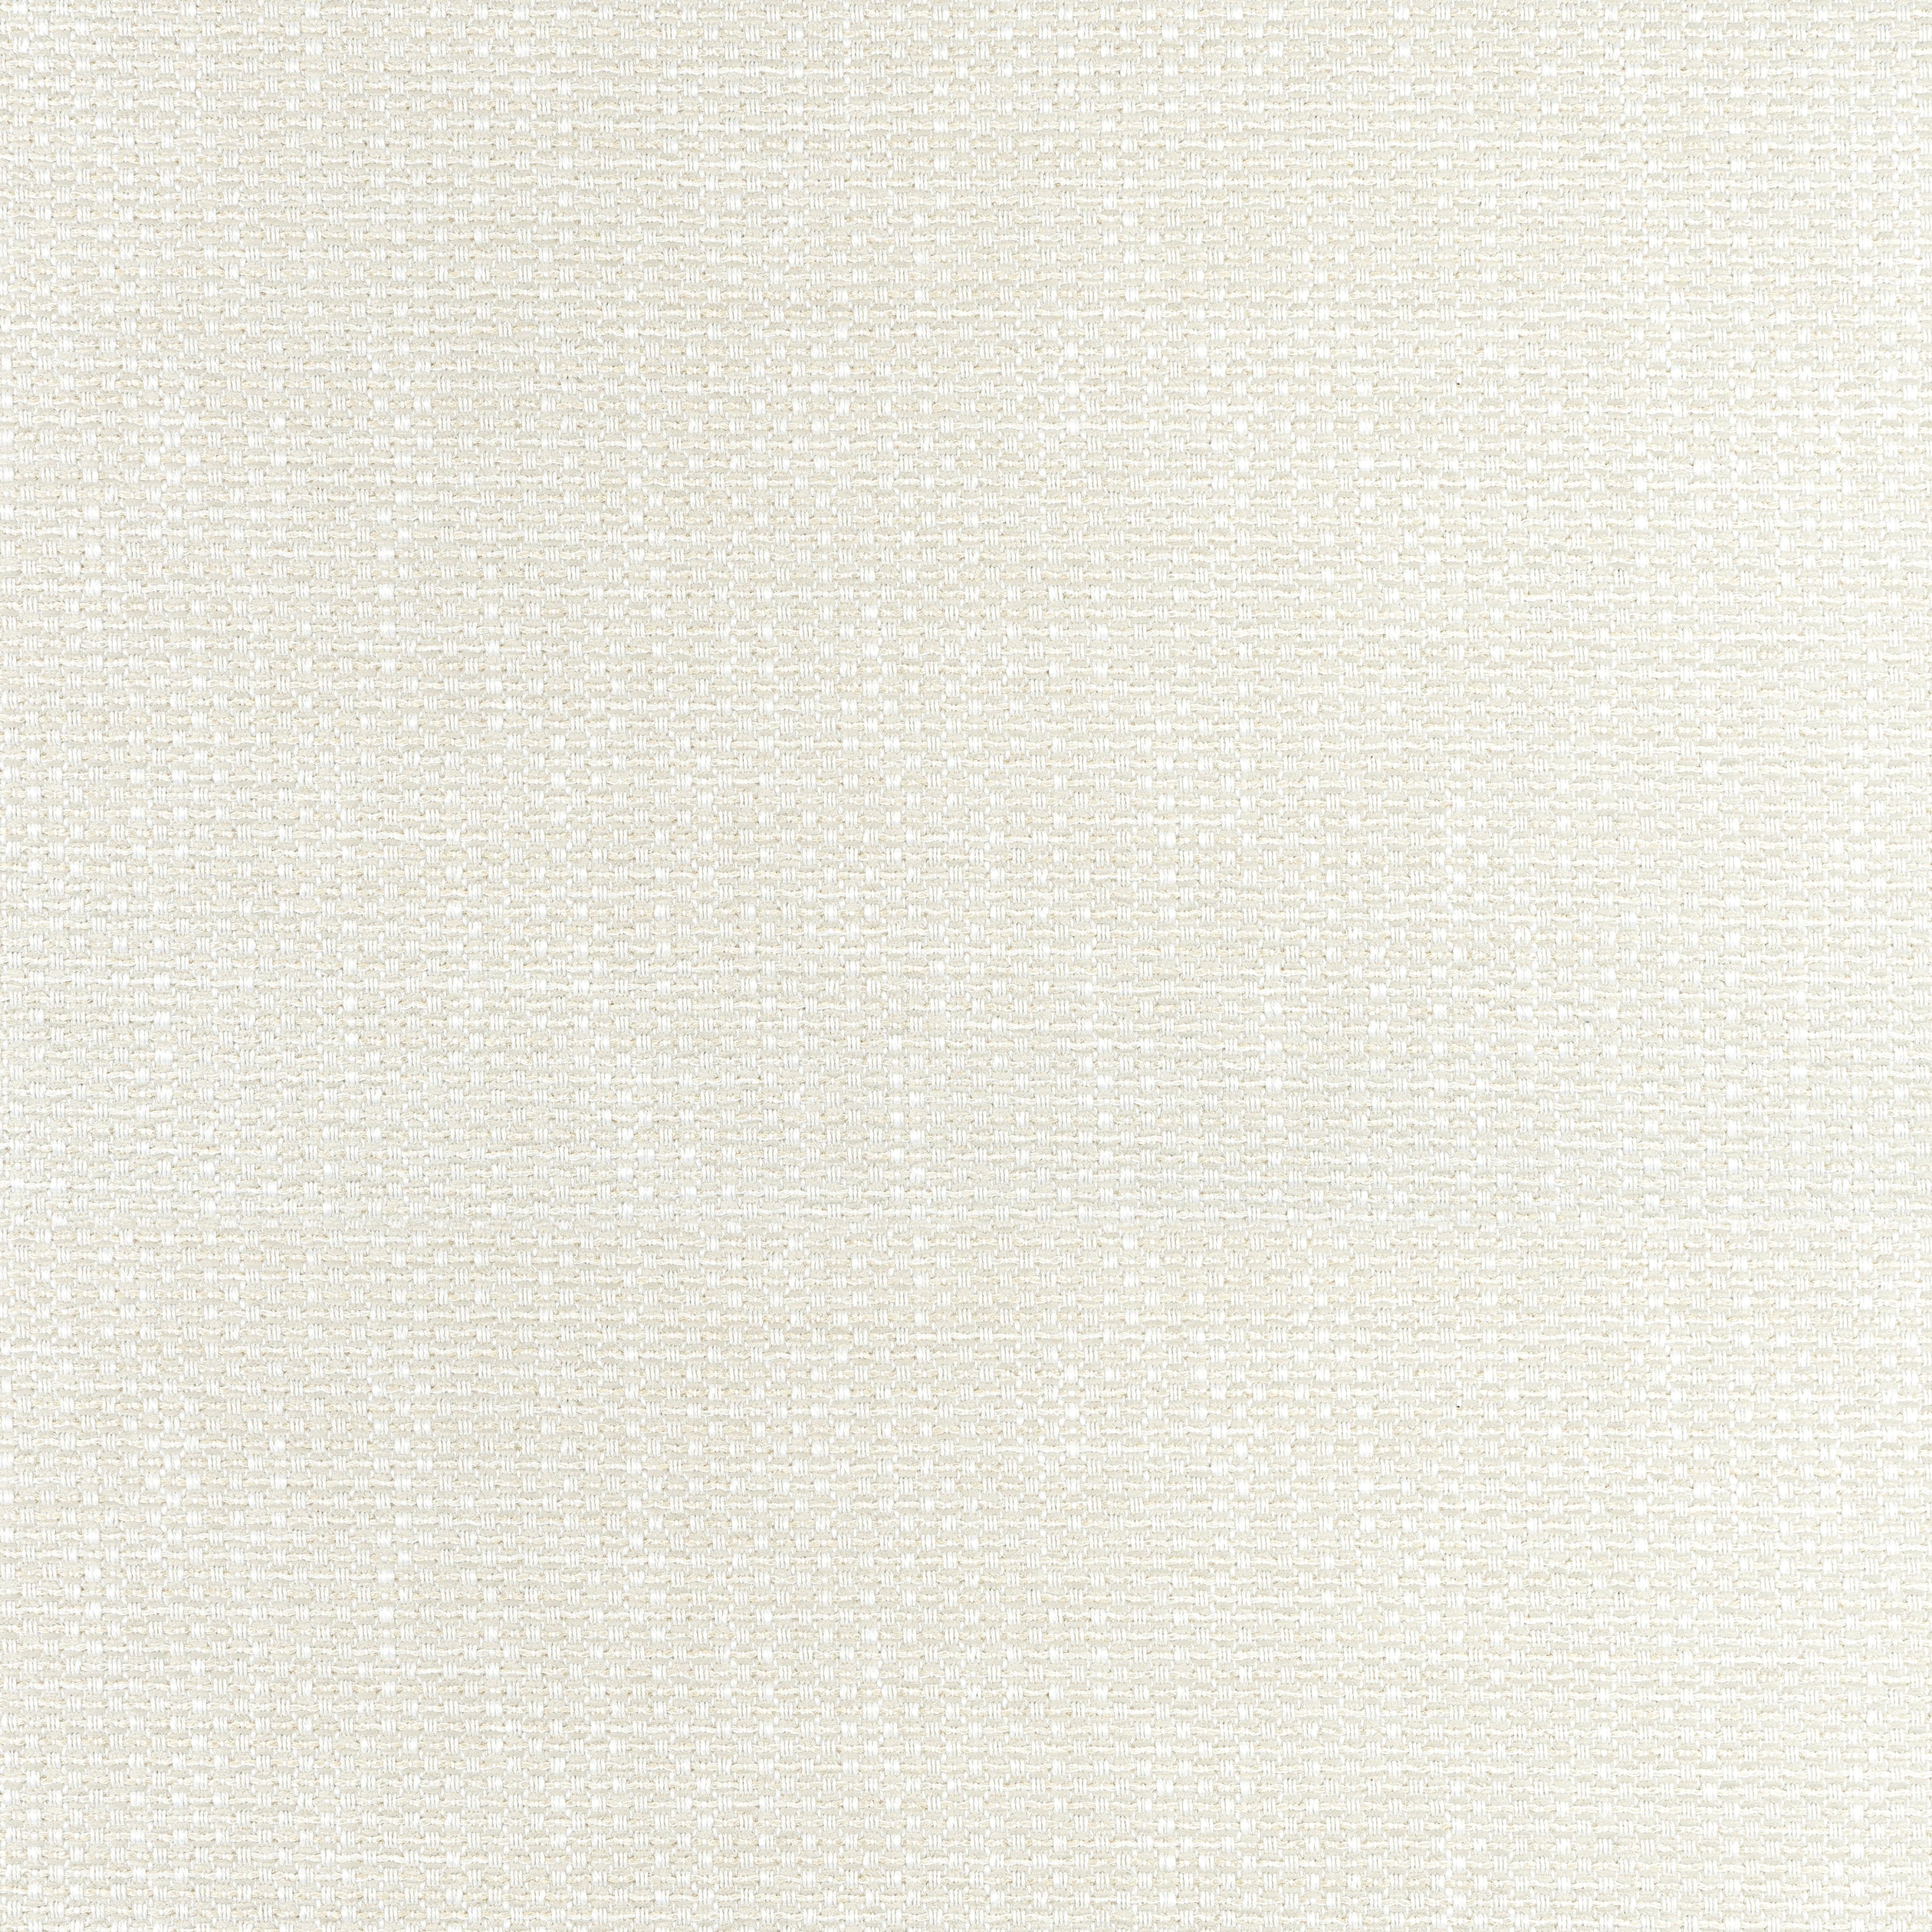 Cascade fabric in parchment color - pattern number W75252 - by Thibaut in the Elements collection